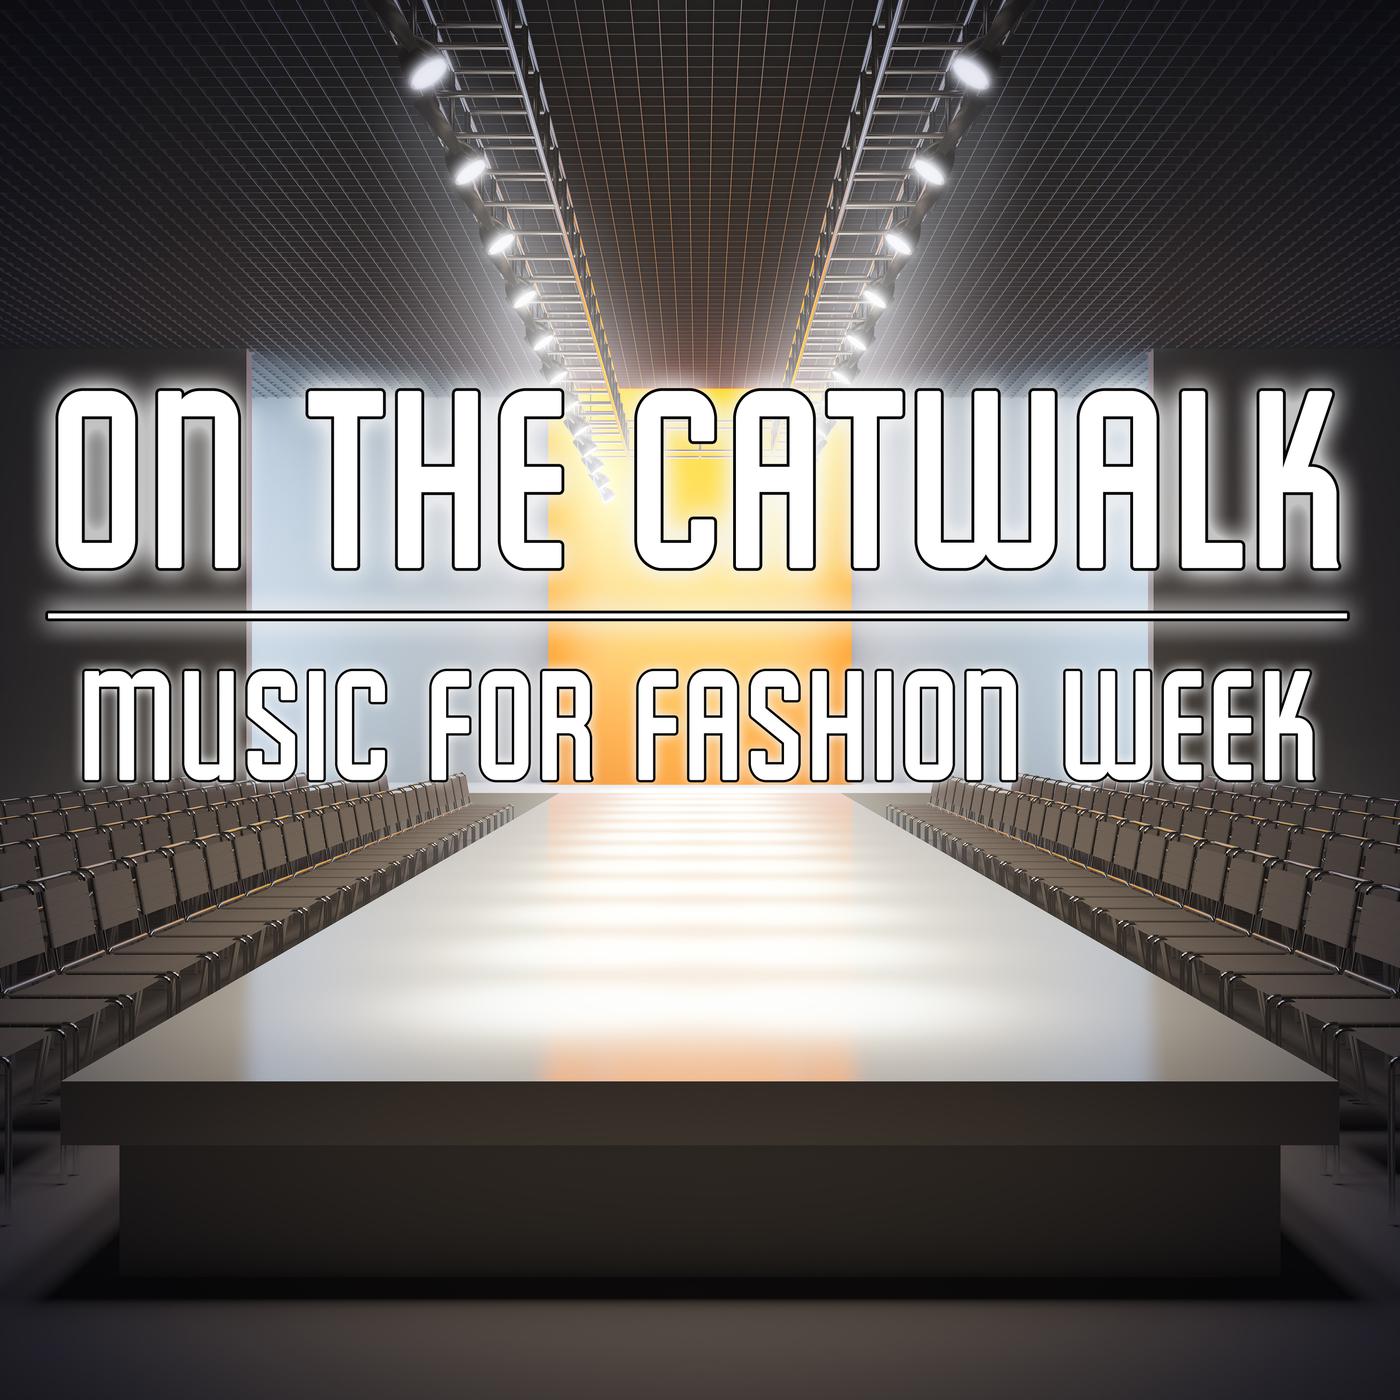 On the Catwalk: Music for Fashion Week